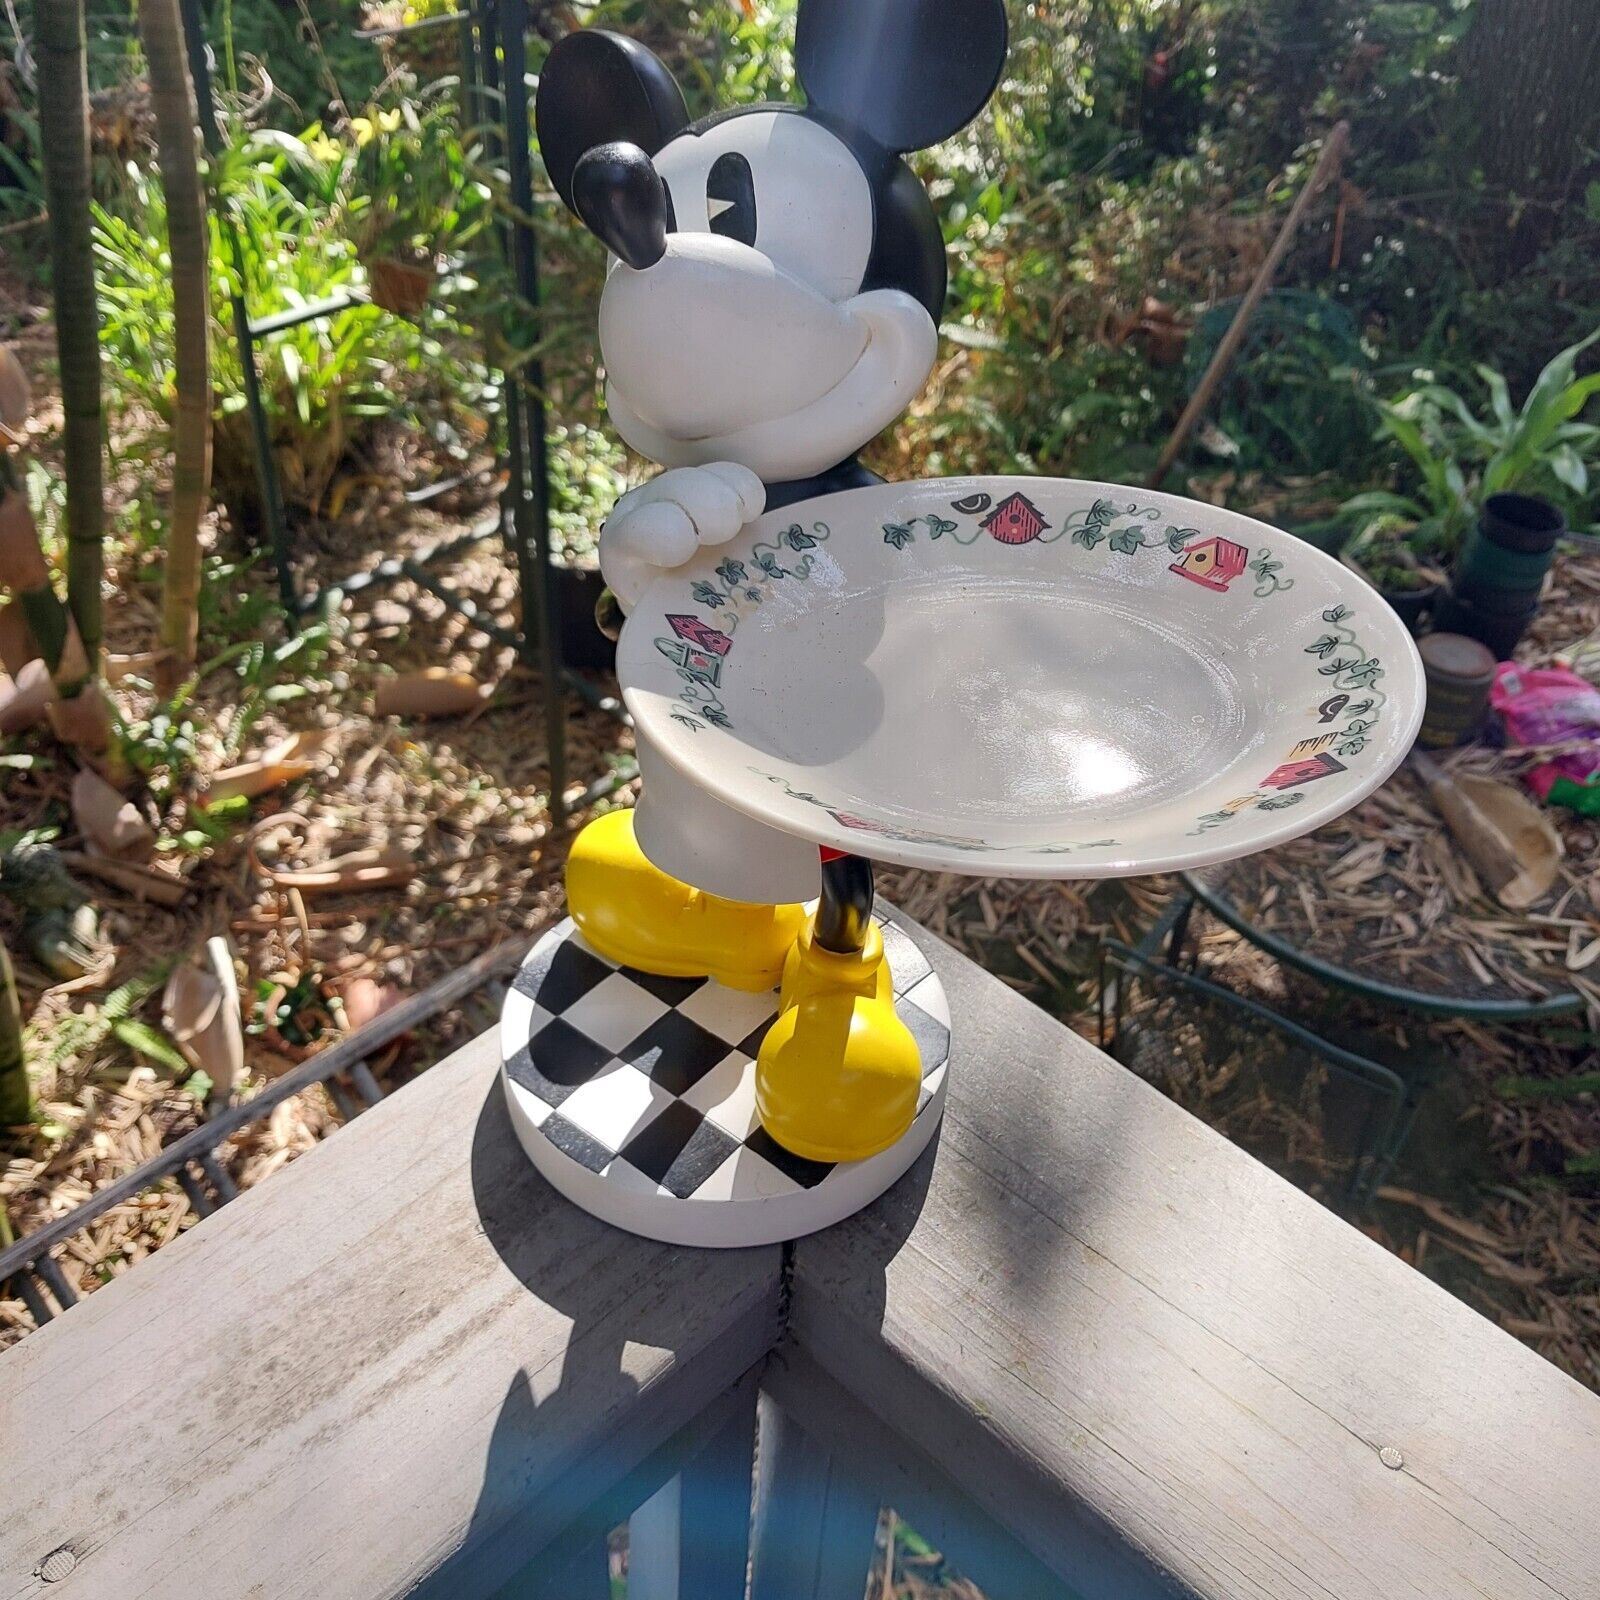 Disney Mickey Mouse Waiter Pizza Server  Statue As Is Florida Estate